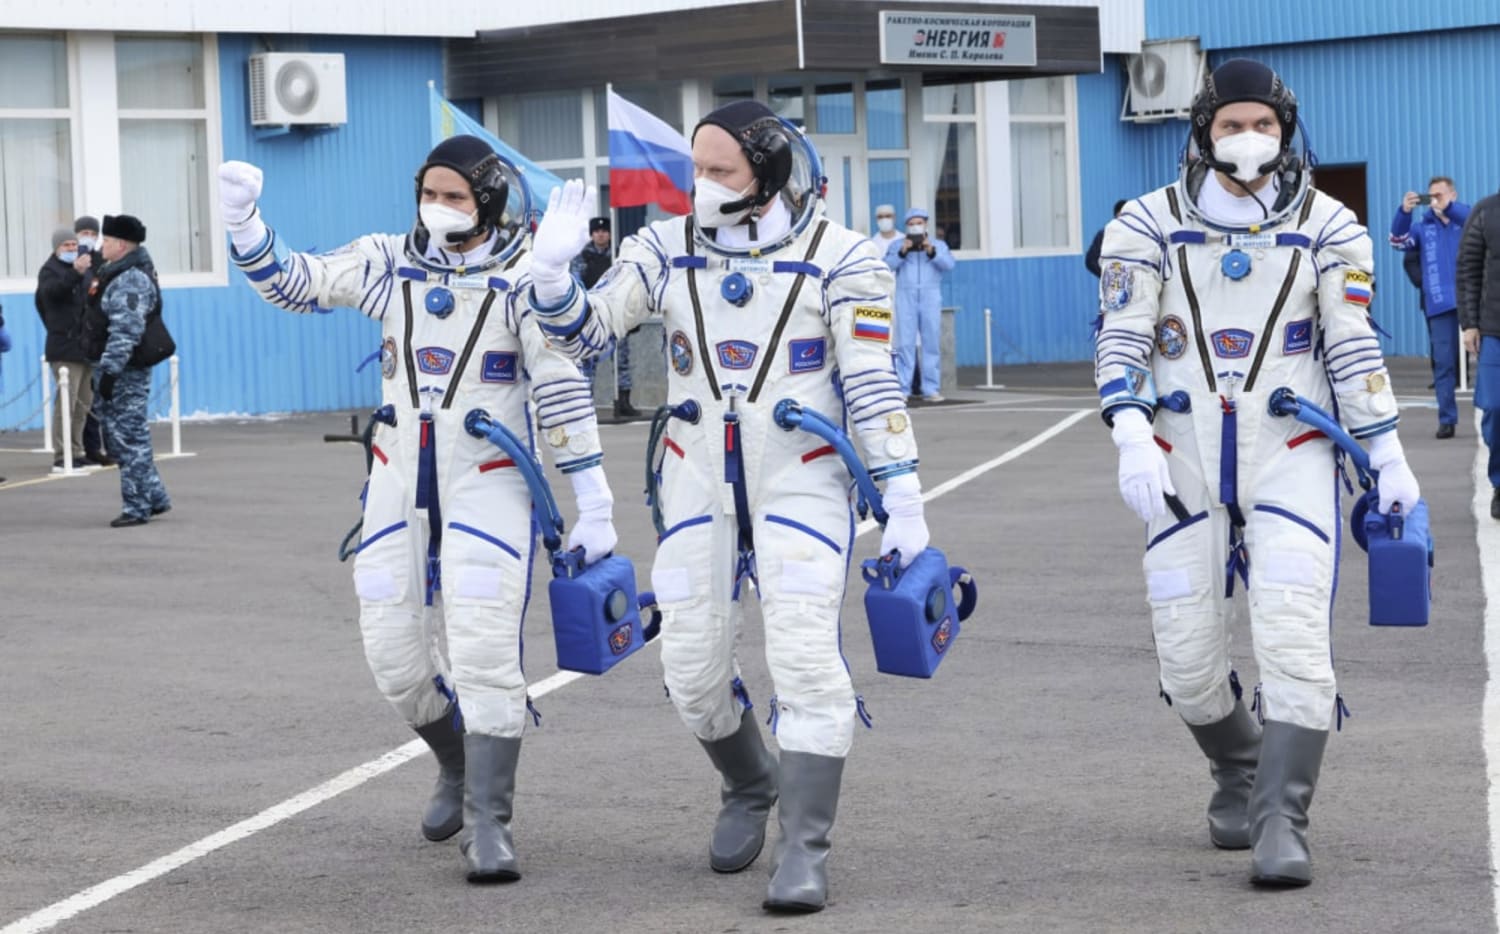 Russia says it will quit the International Space Station amid Ukraine war